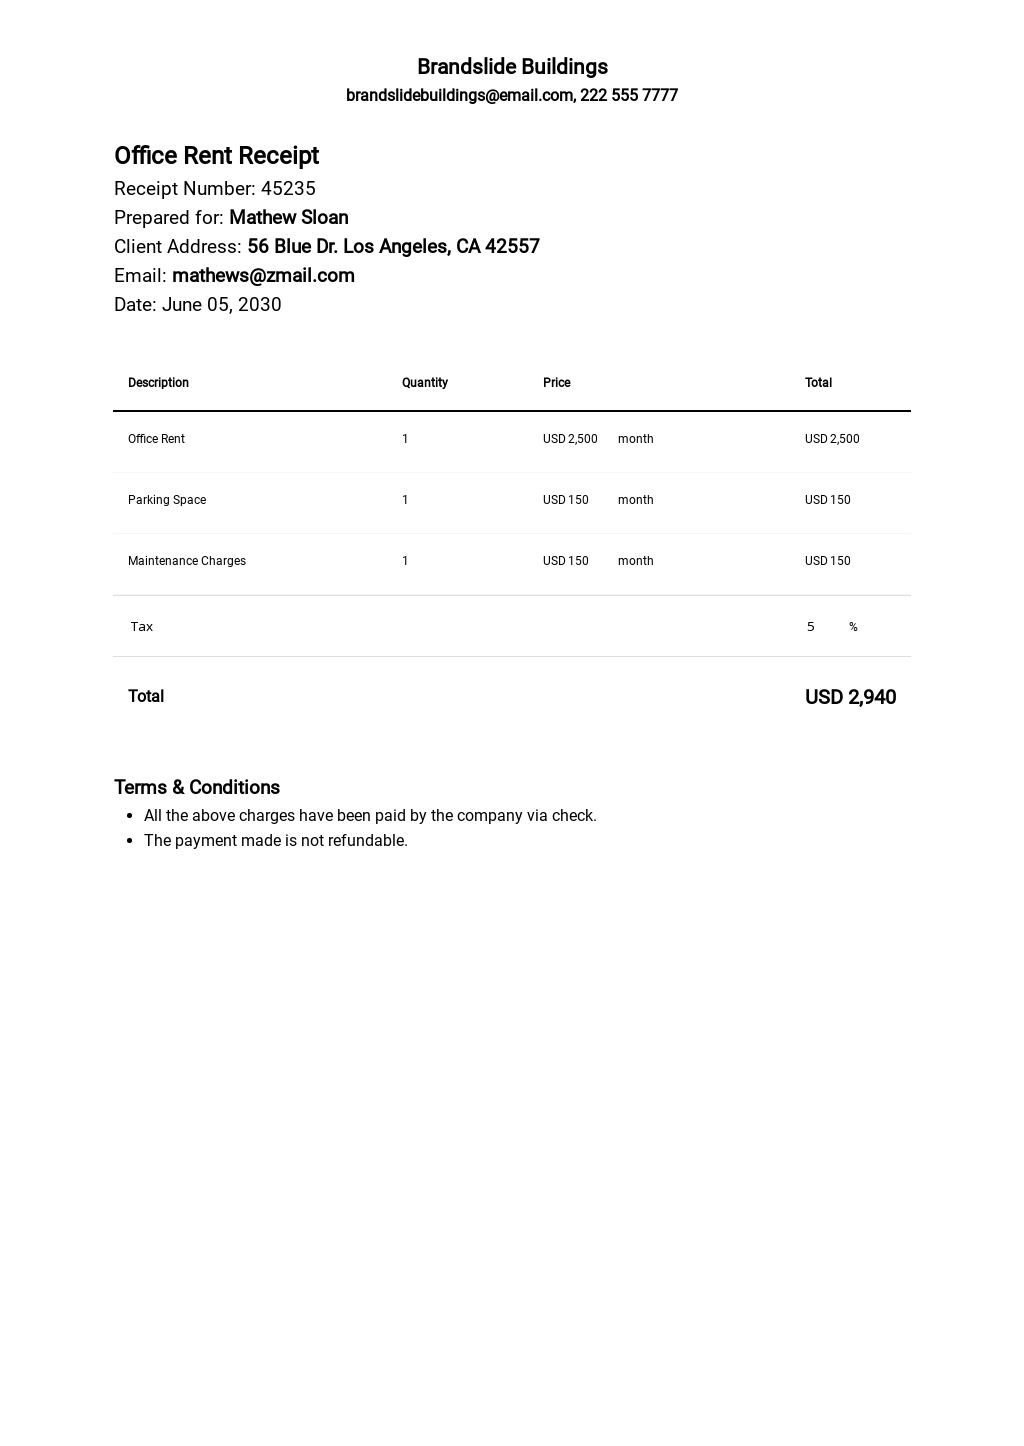 download-39-rent-receipt-templates-microsoft-word-doc-template